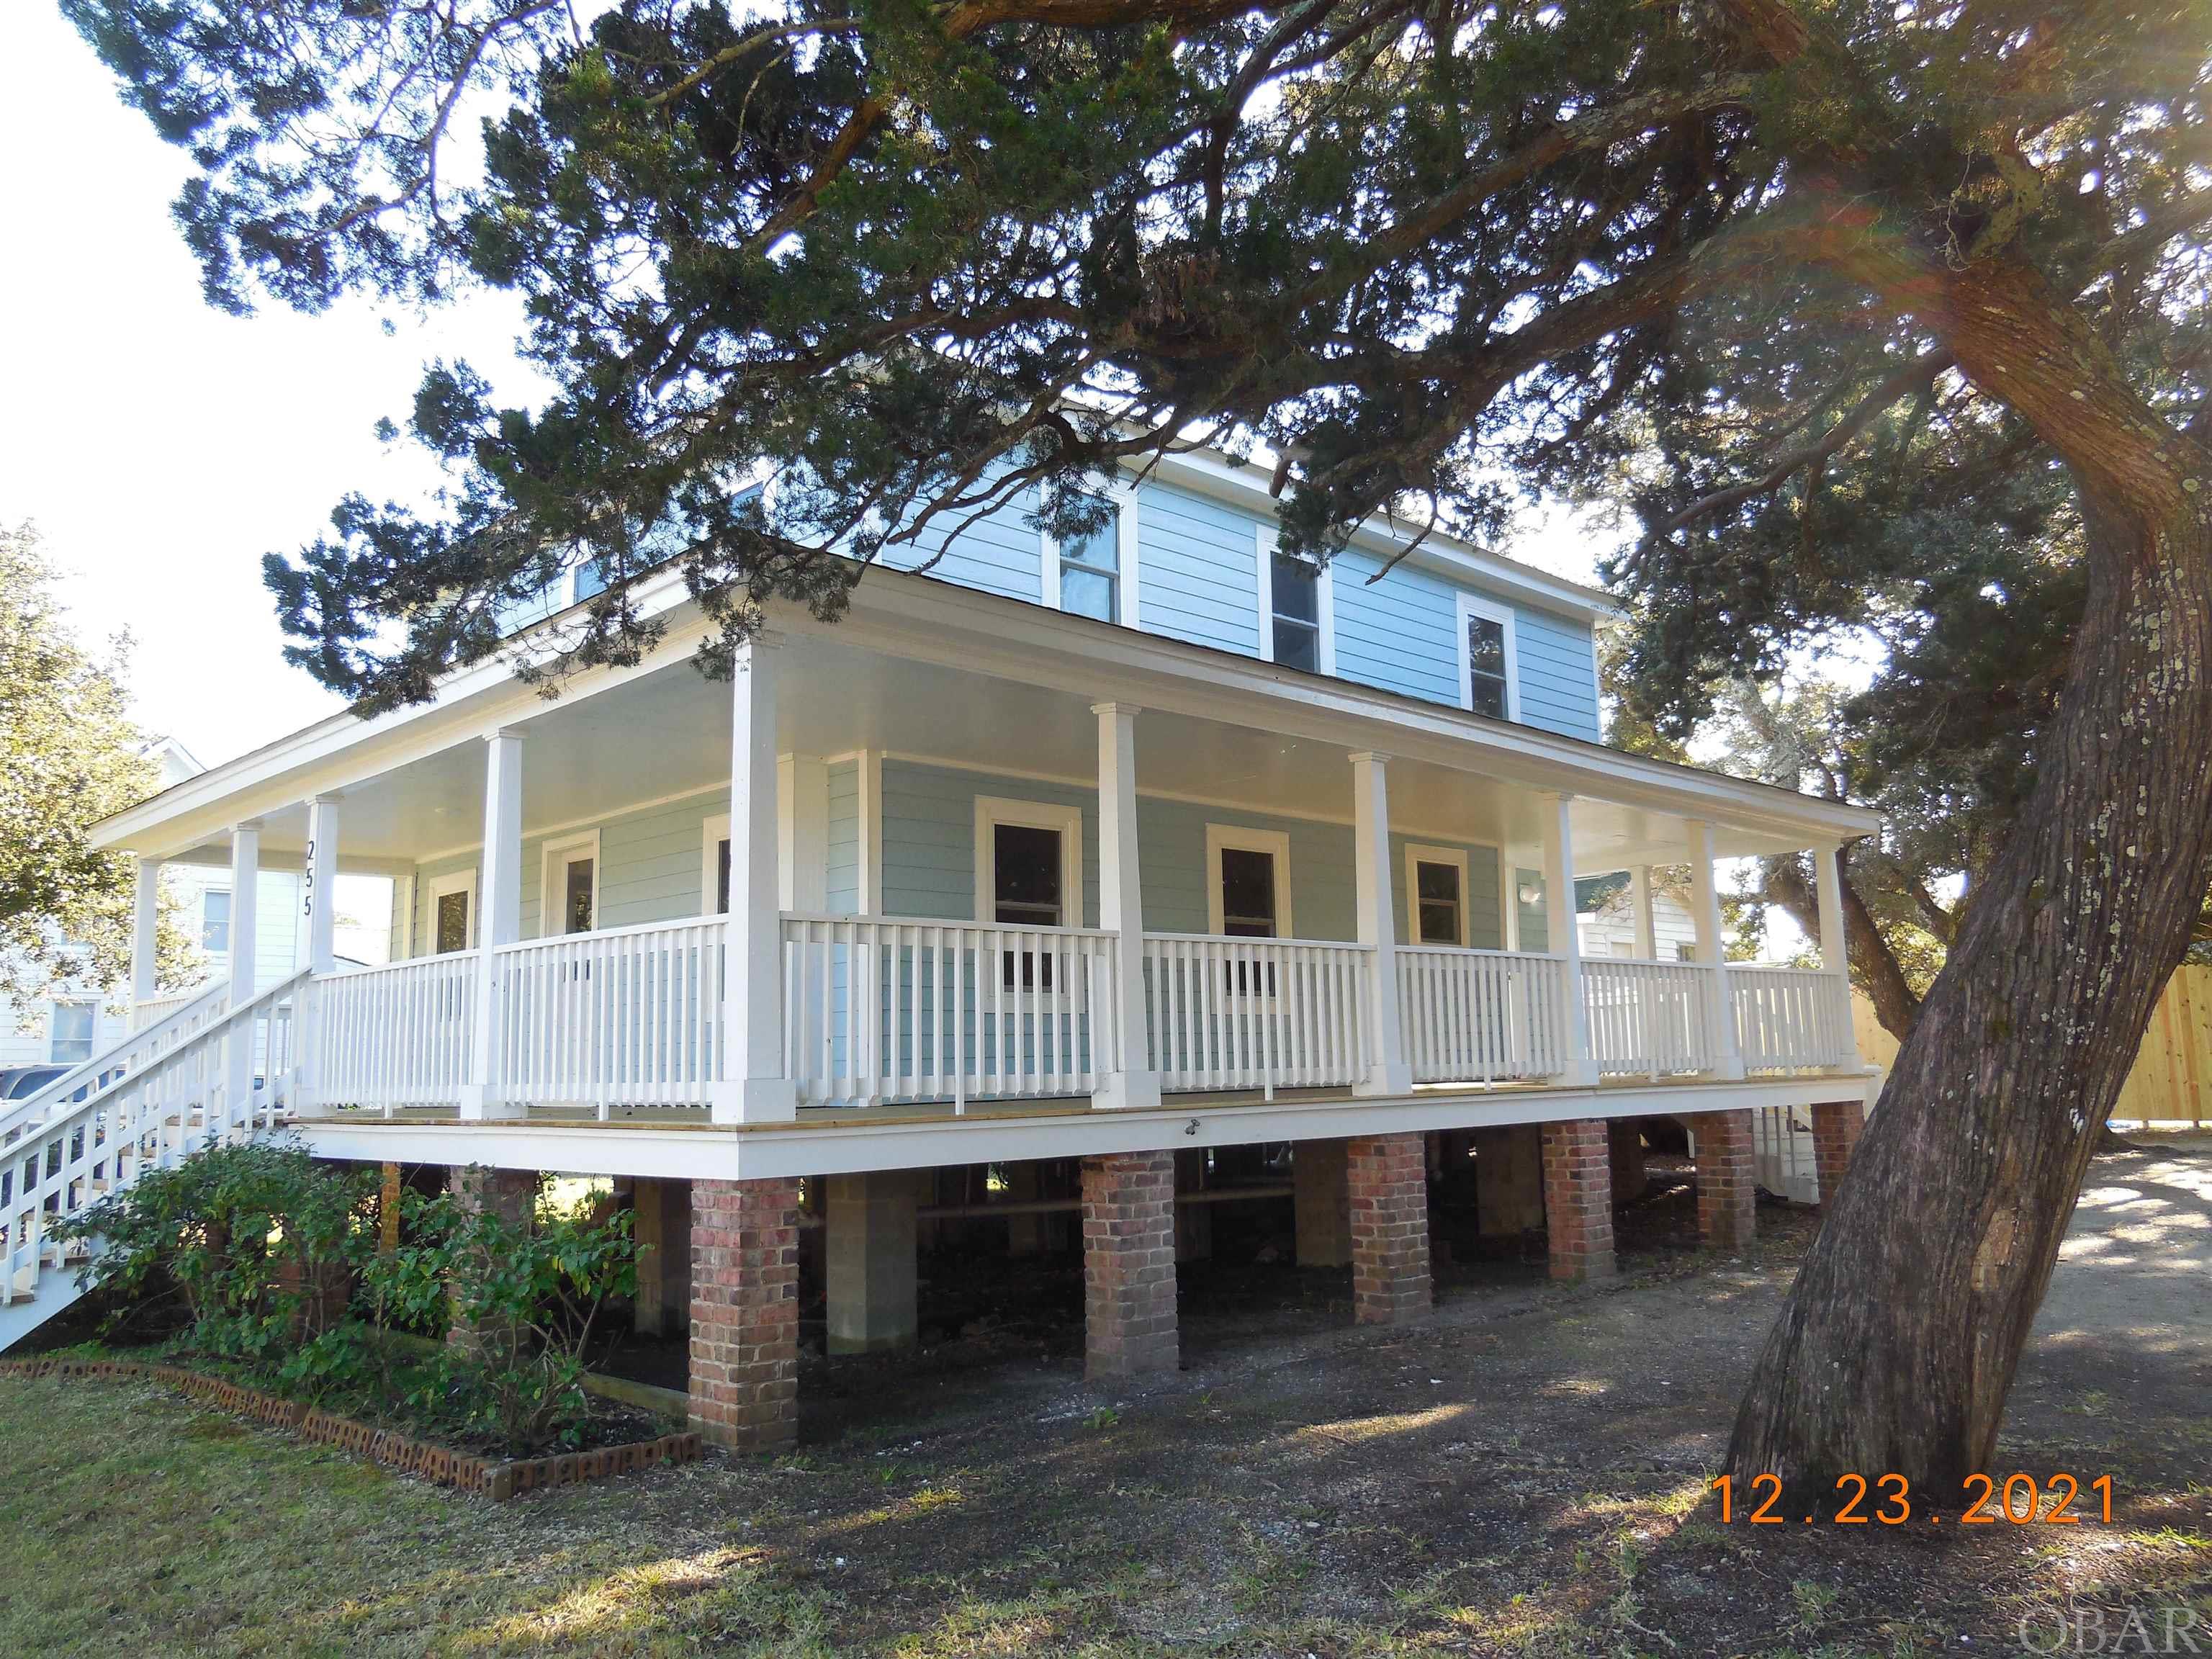 This charming historic 4 bedroom, 3 bath island home located near the Ocracoke Lighthouse is waiting for you to call home! The property has beautiful old gnarled live oaks. Also, there is an unique out building that would be perfect for an artist's studio. New in 2021: exterior LP smart siding and PVC window trim and corner boards, windows, interior and exterior painting, porch ceiling & deck boards & front steps. The "L" shape front/side covered porch is a great place for rocking chairs or porch swing to enjoy evenings or people watch. Wood floors, tiled bath/showers, beautiful original interior steps and banister, original interior doors, mini splits to heat/cool the downstairs and heat pump to heat/cool the upstairs. Open kitchen/dining, utility area, living room, bedroom and full bath on the first floor. 3 bedrooms and 2 bathrooms on the second floor.